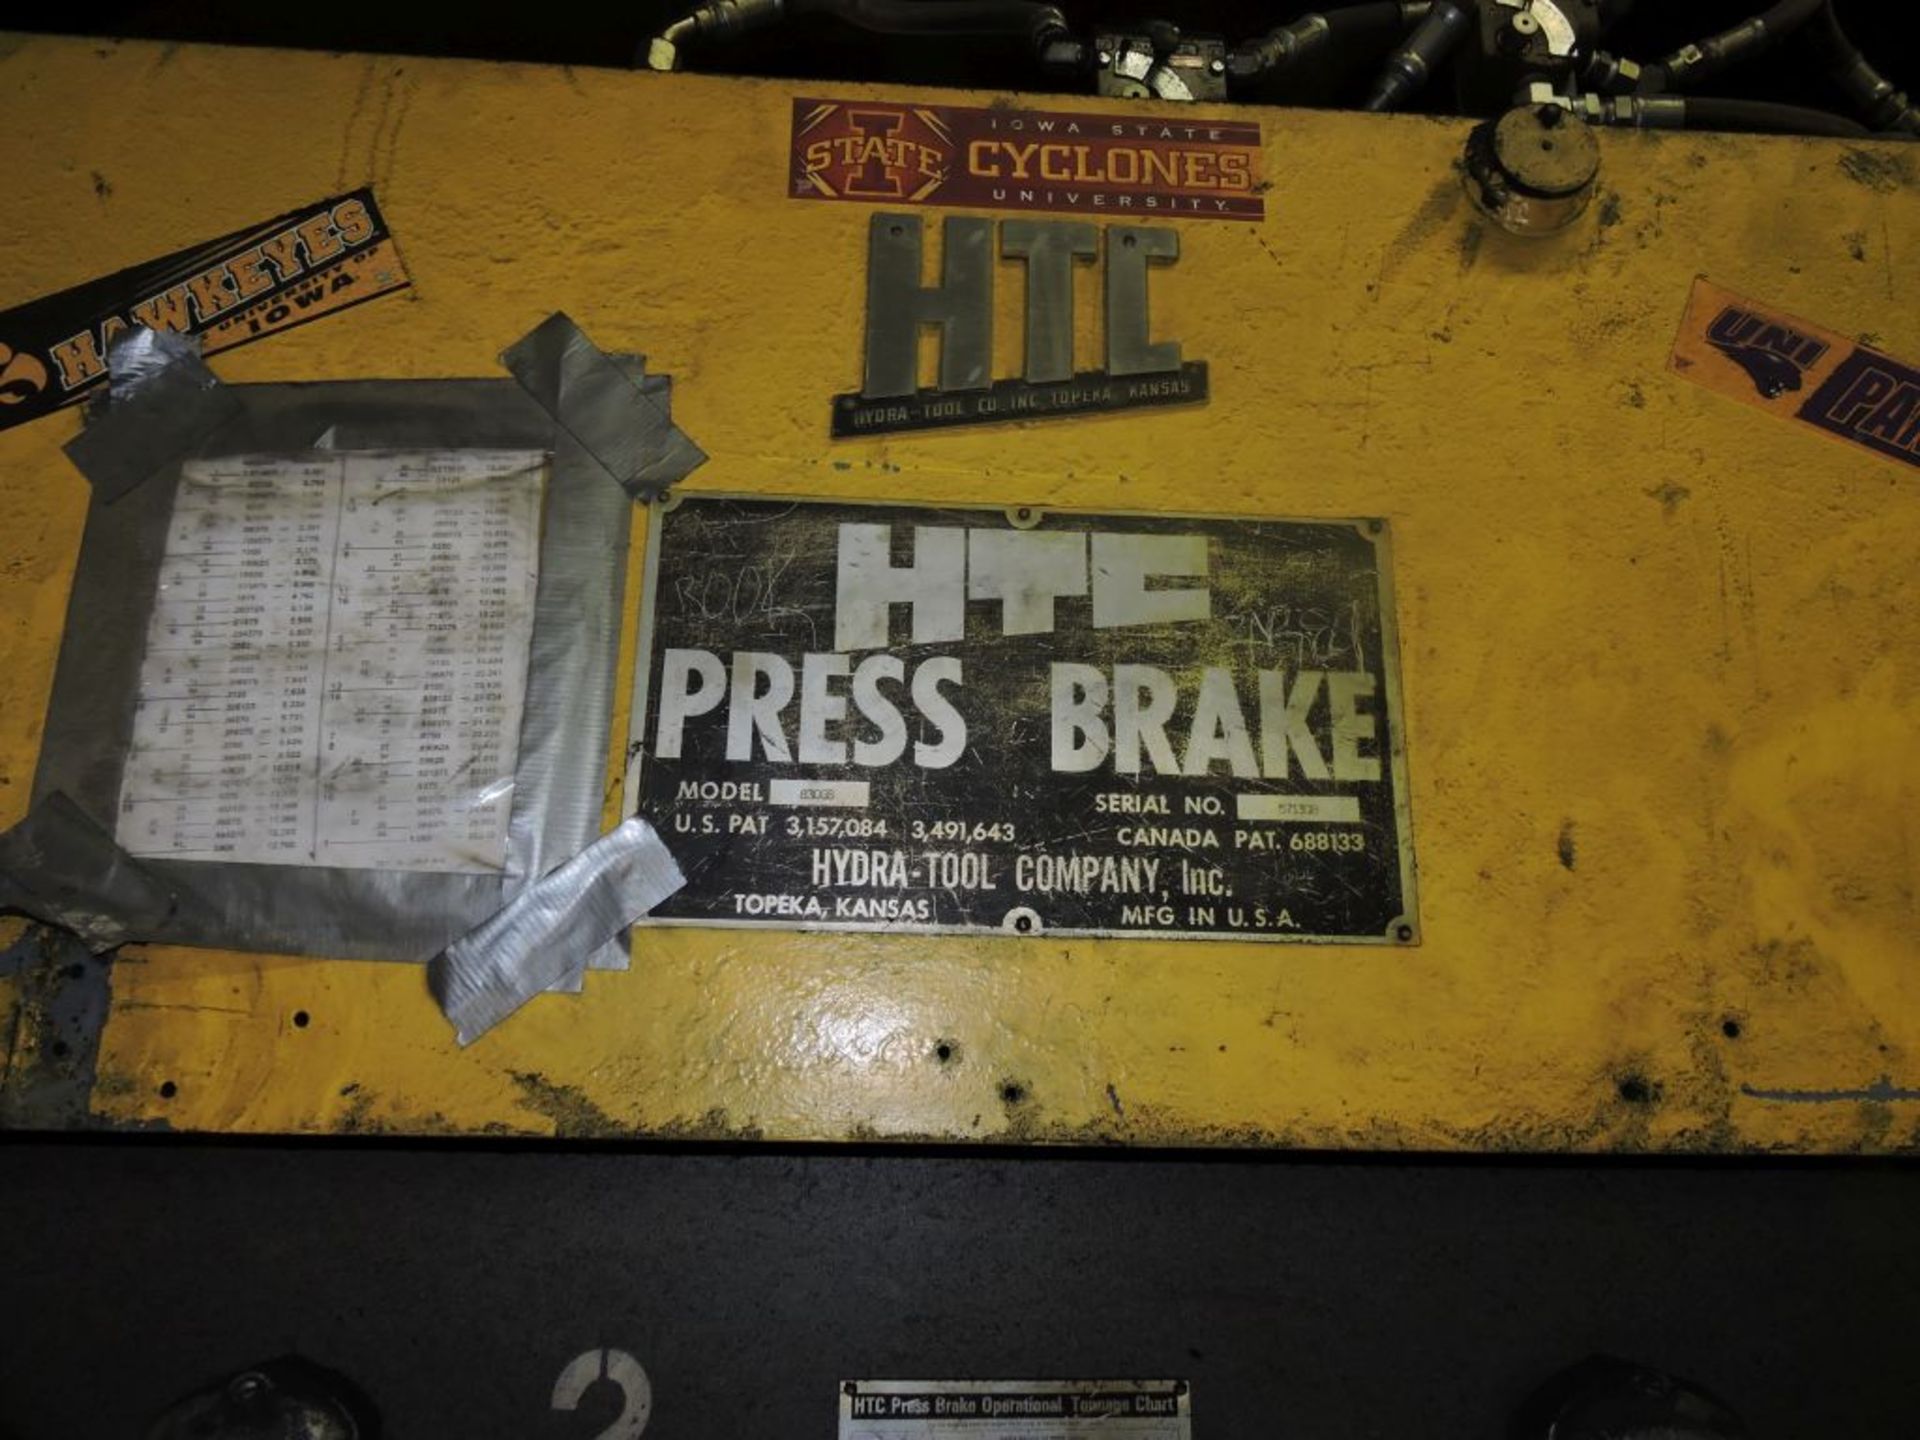 HTC hydraulic punch press, model 830GS, 130 T., 9' 7", 150 punches. - Image 2 of 8